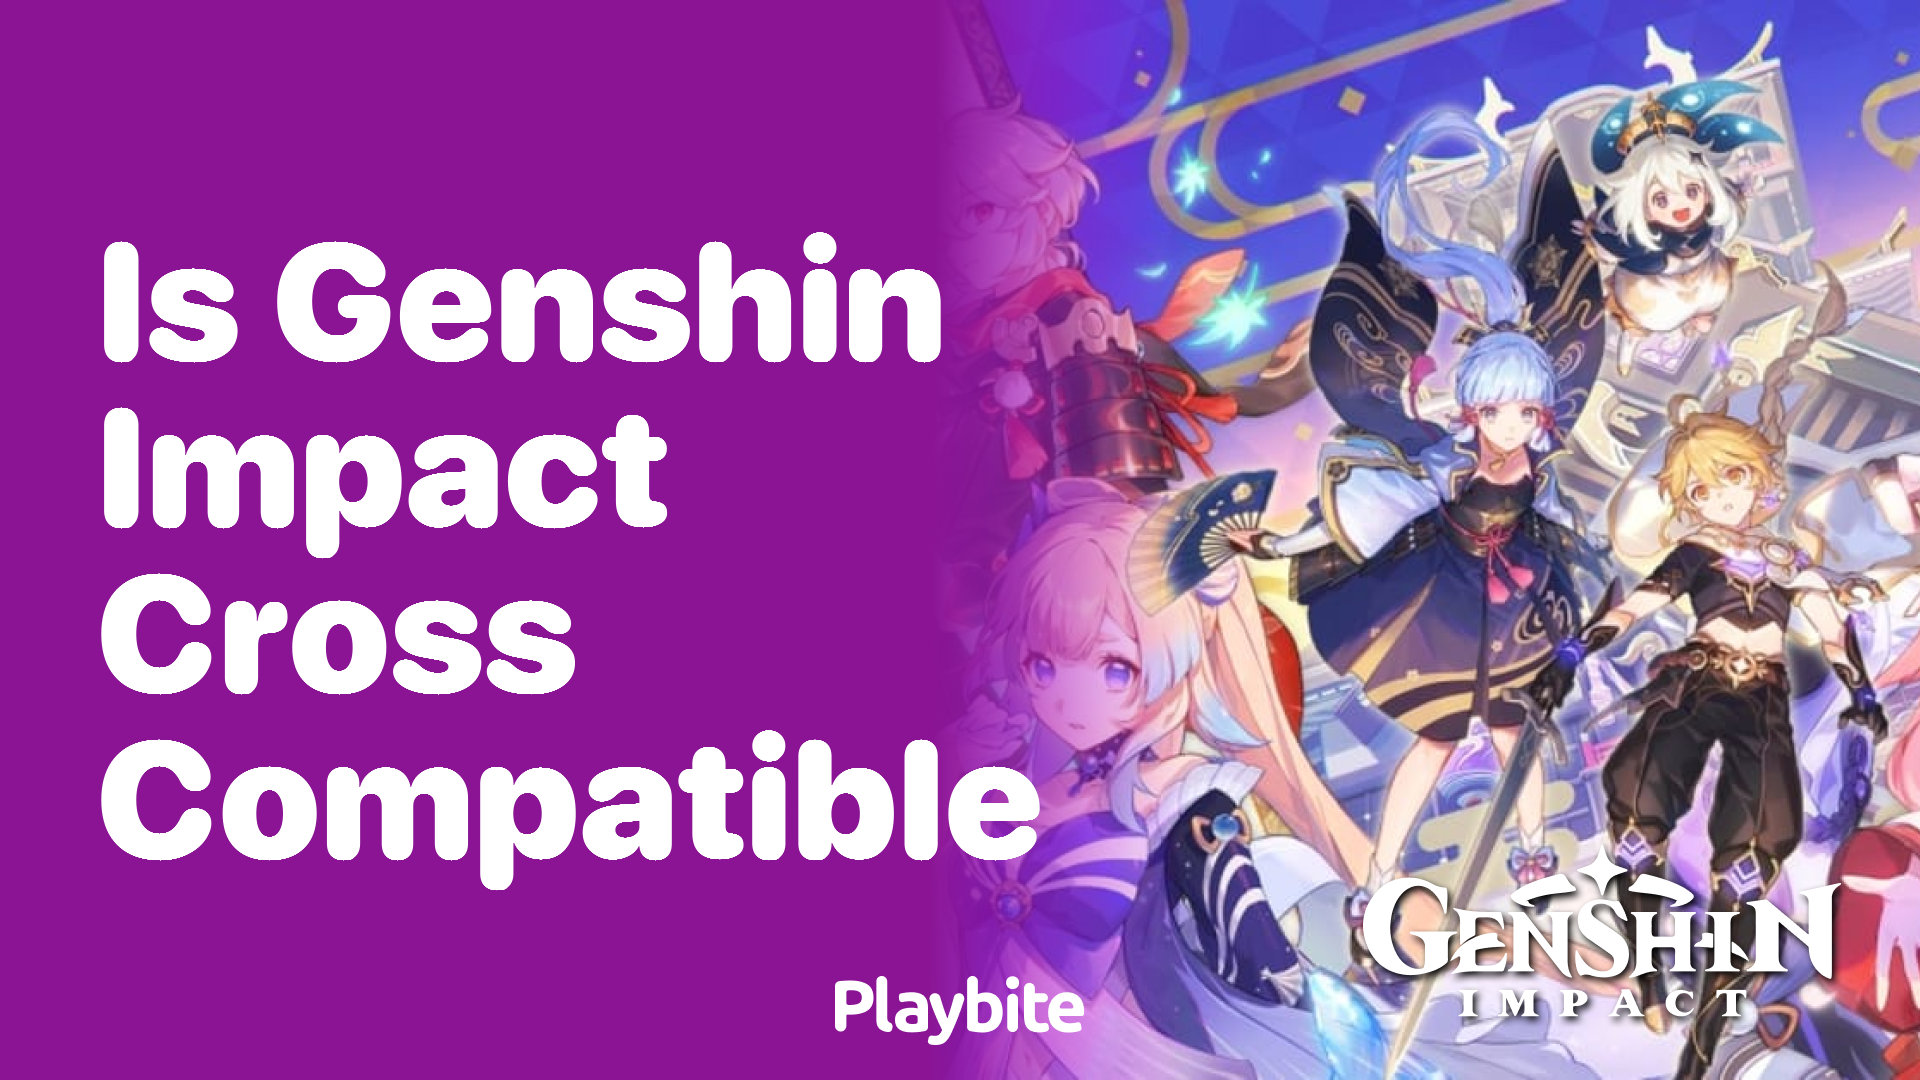 Is Genshin Impact Cross-Platform Compatible? Find Out Here!